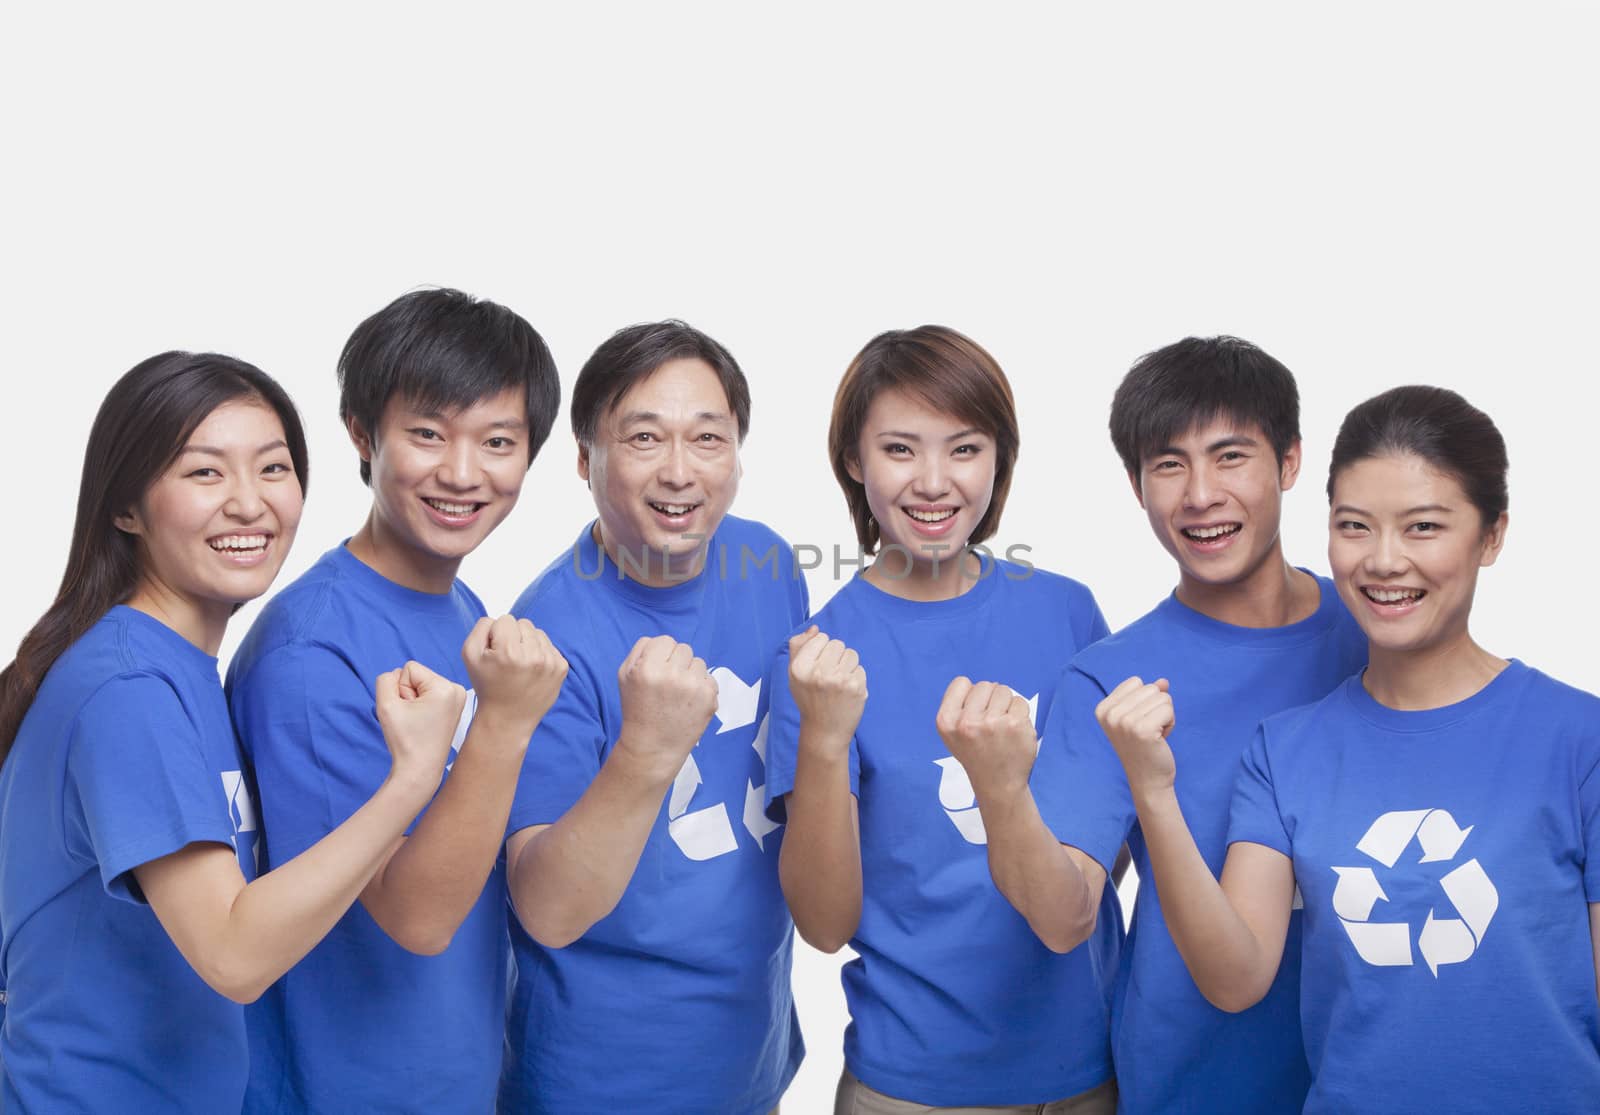 Group of people with raised fists, studio shot by XiXinXing